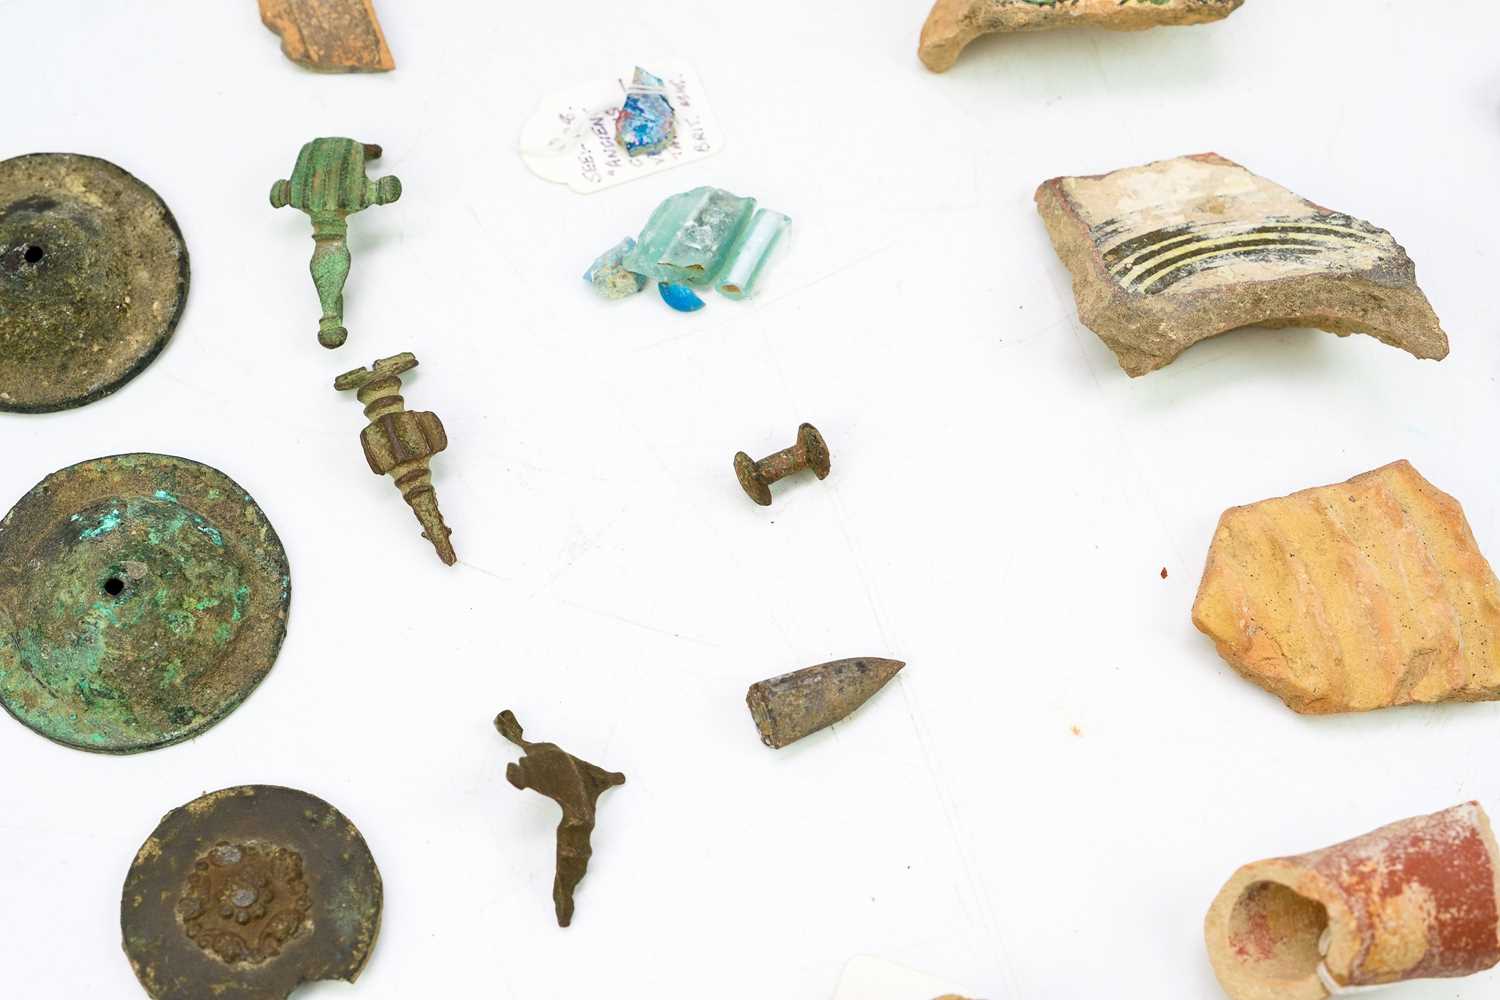 A group of Cypriot pottery shards and glass fragments. - Image 3 of 3